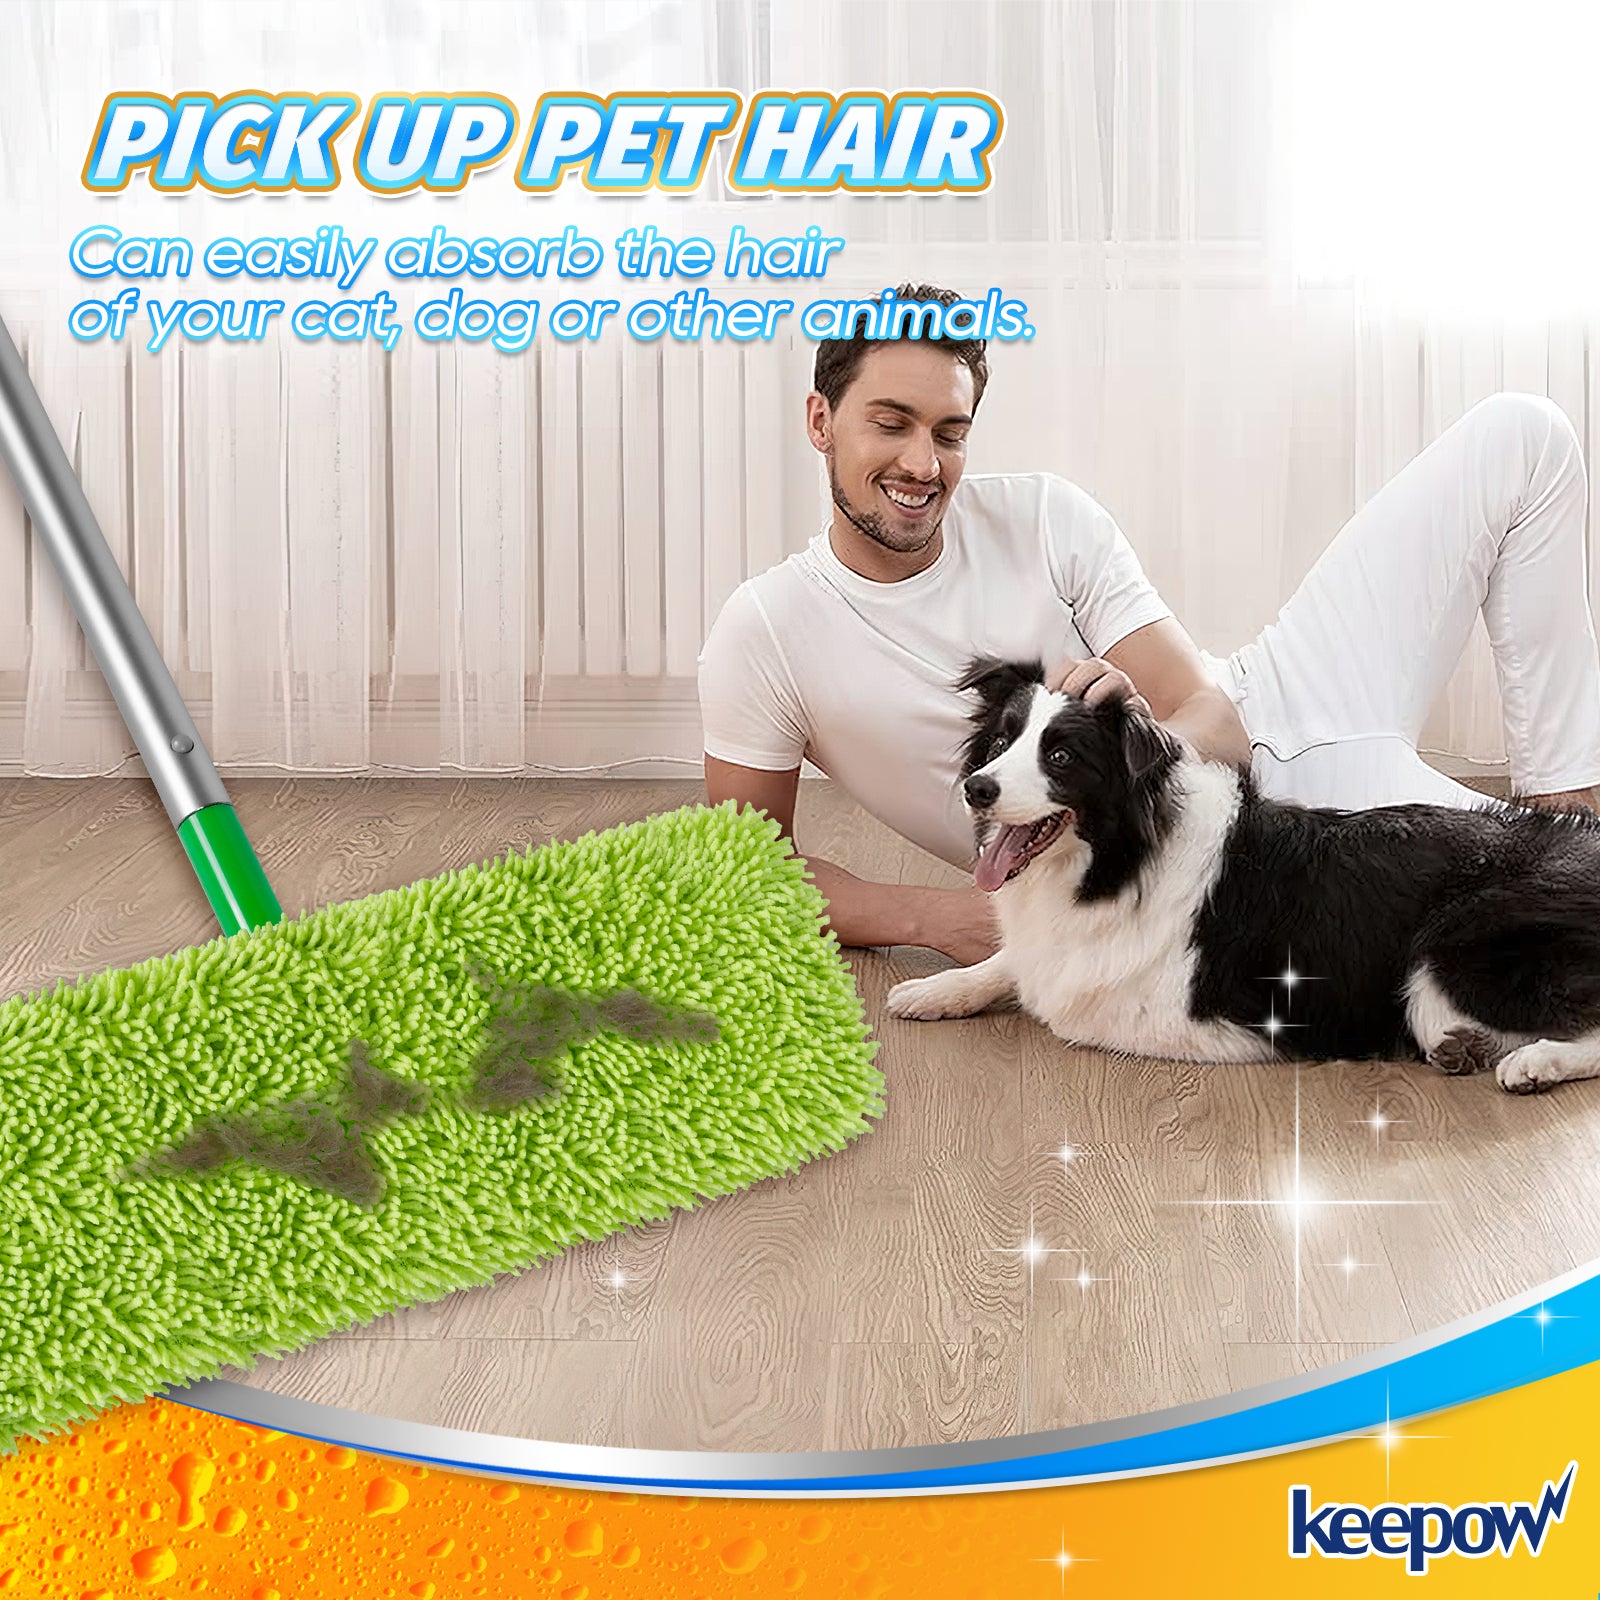 Keepow Wet Mopping Cloths, Washable Microfiber XL Wet Pads Refills for Surface/Hardwood Floor Cleaning